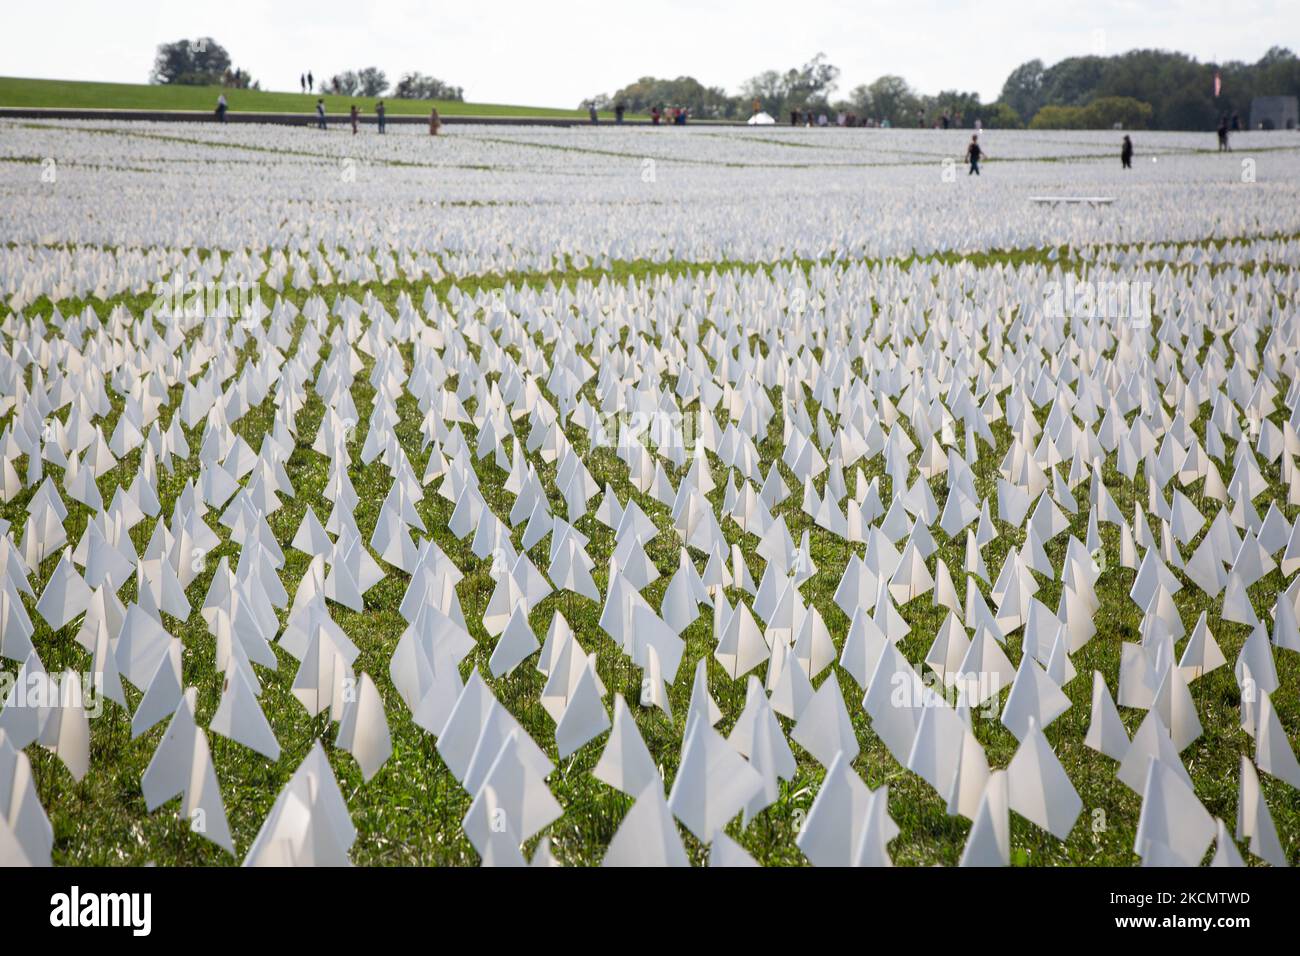 An exhibition of white flags representing more than 600,000 Americans who have died of COVID-19 covers more than 20 acres of the National Mall in Washington, D.C. on September 18, 2021. (Photo by Karla Ann Cote/NurPhoto) Stock Photo